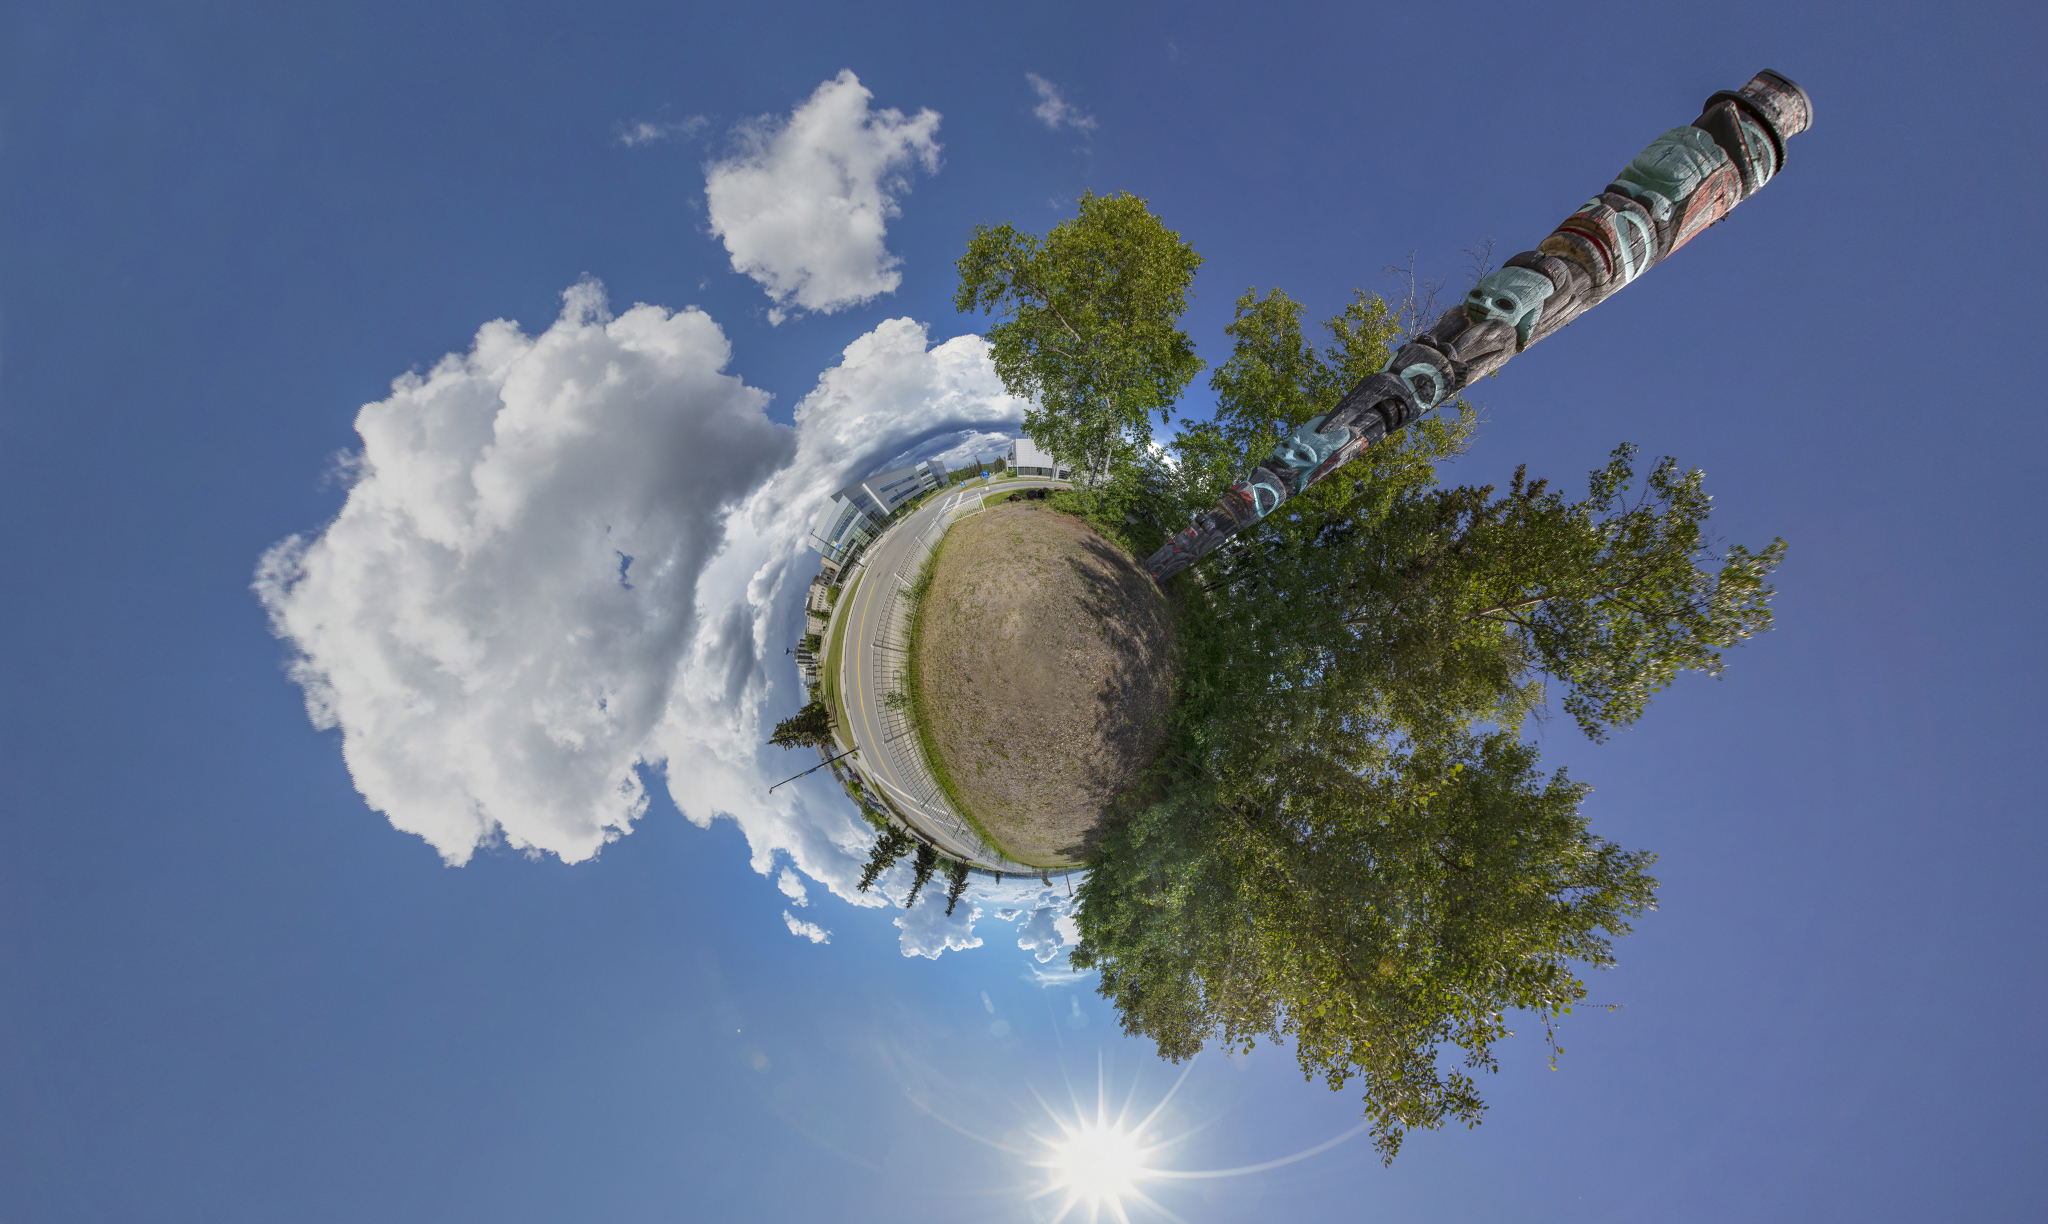 360 degree view of museum grounds.